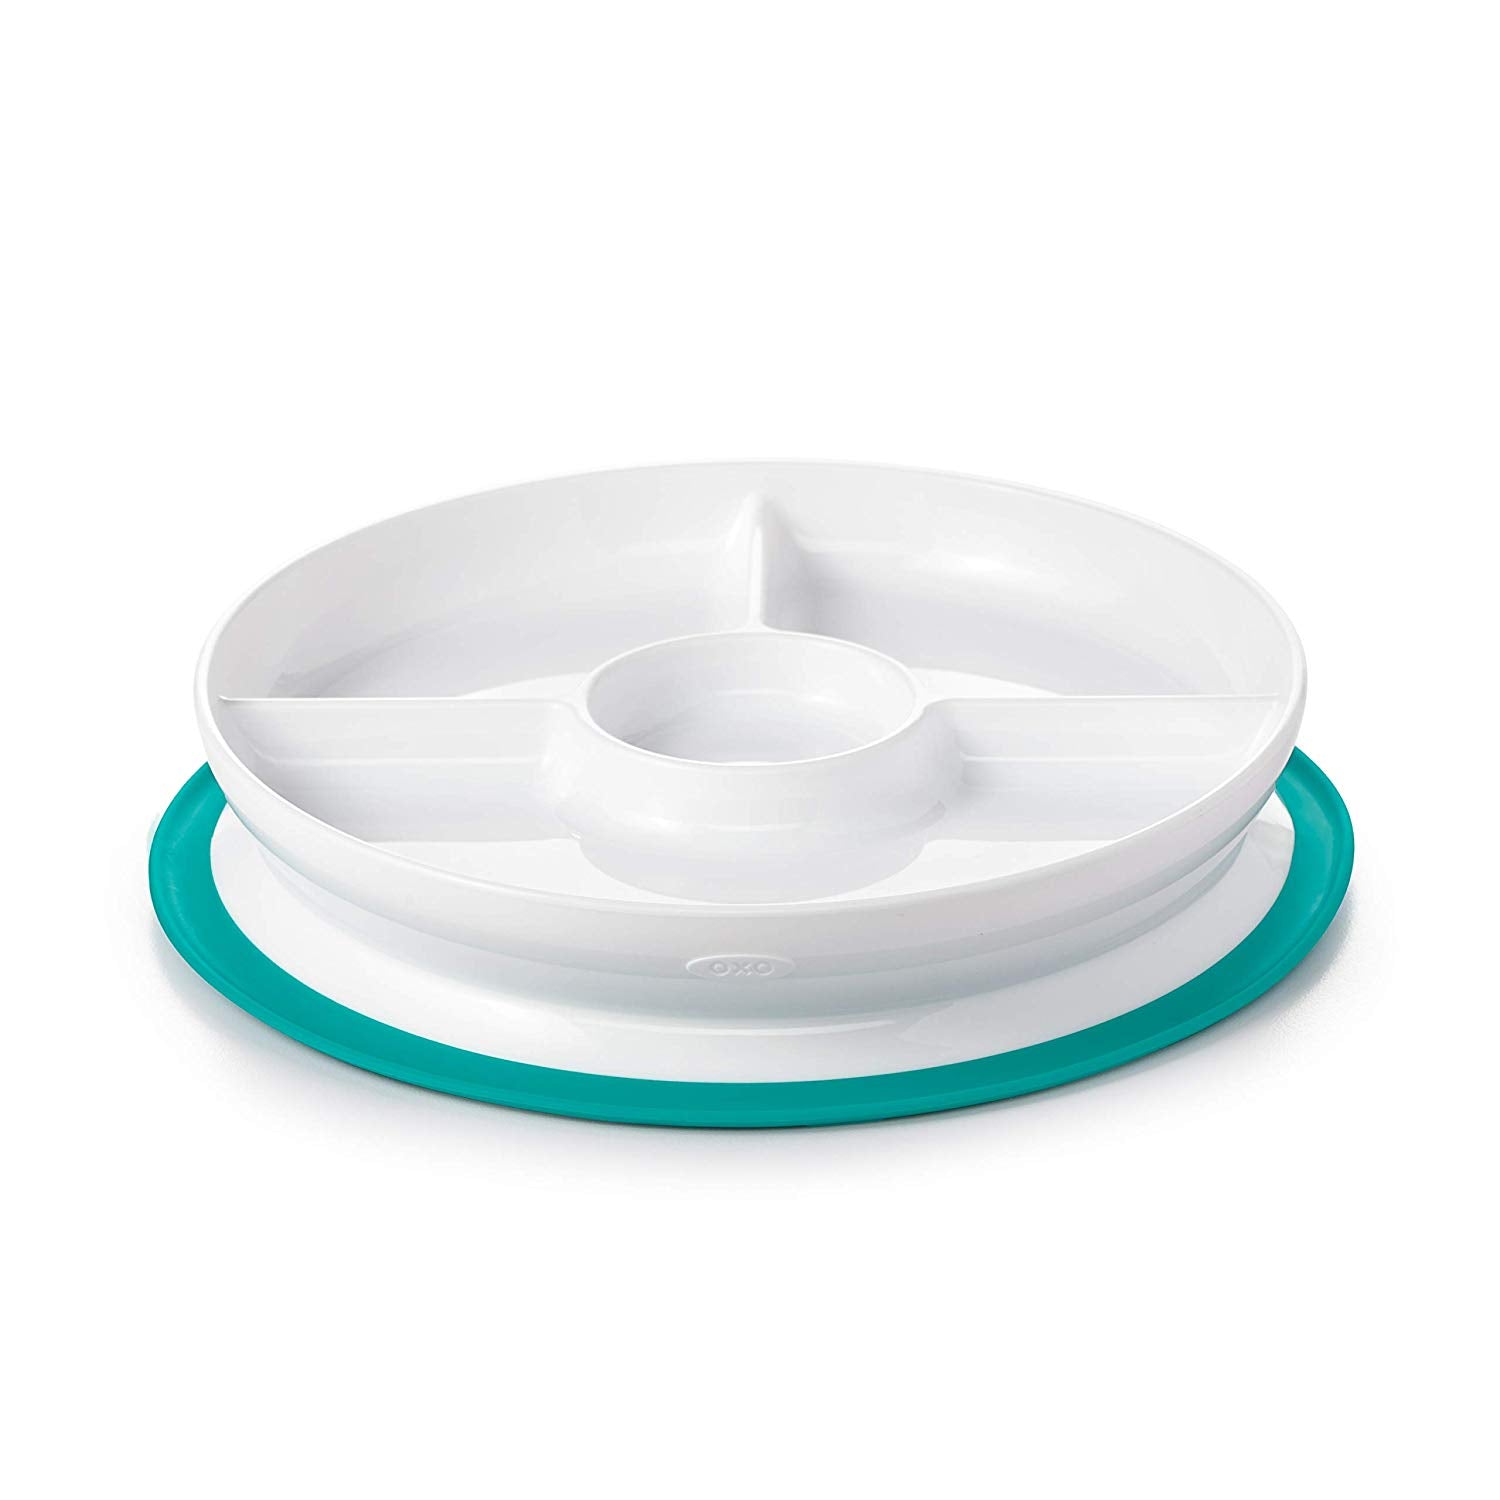 Stick & Stay Suction Bowl